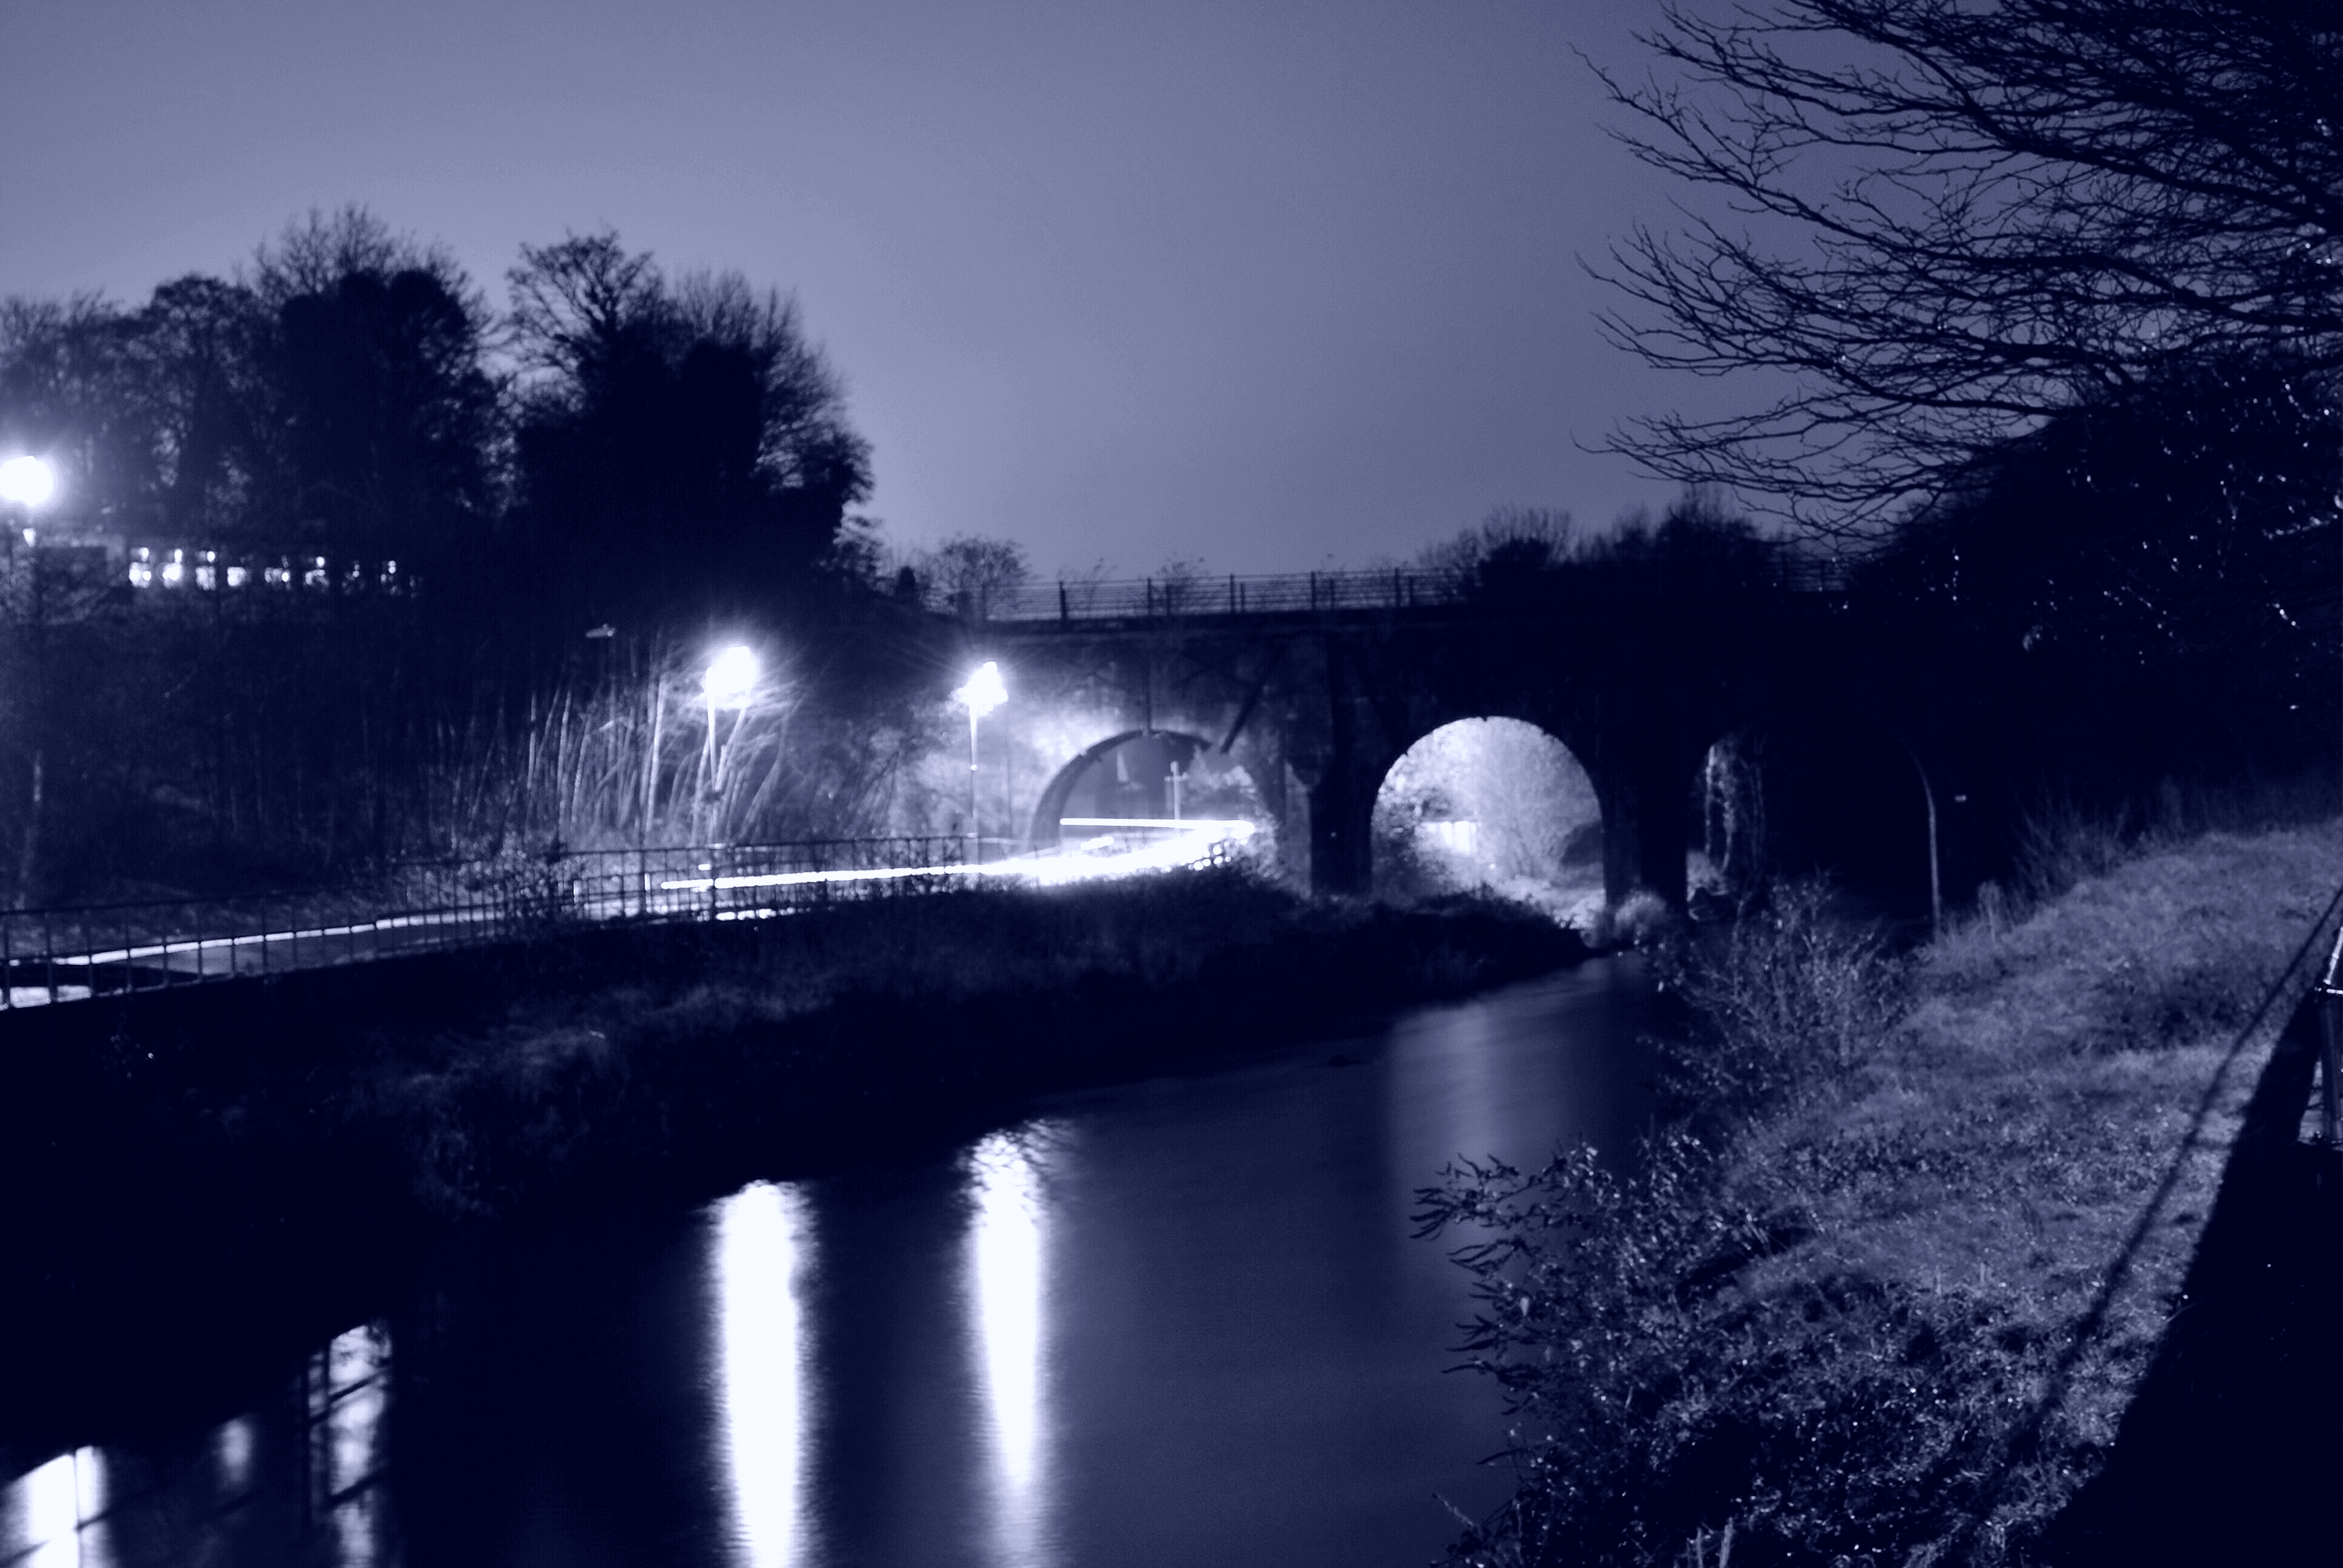 A Nights Fantasy - The Arches in the grey of Night